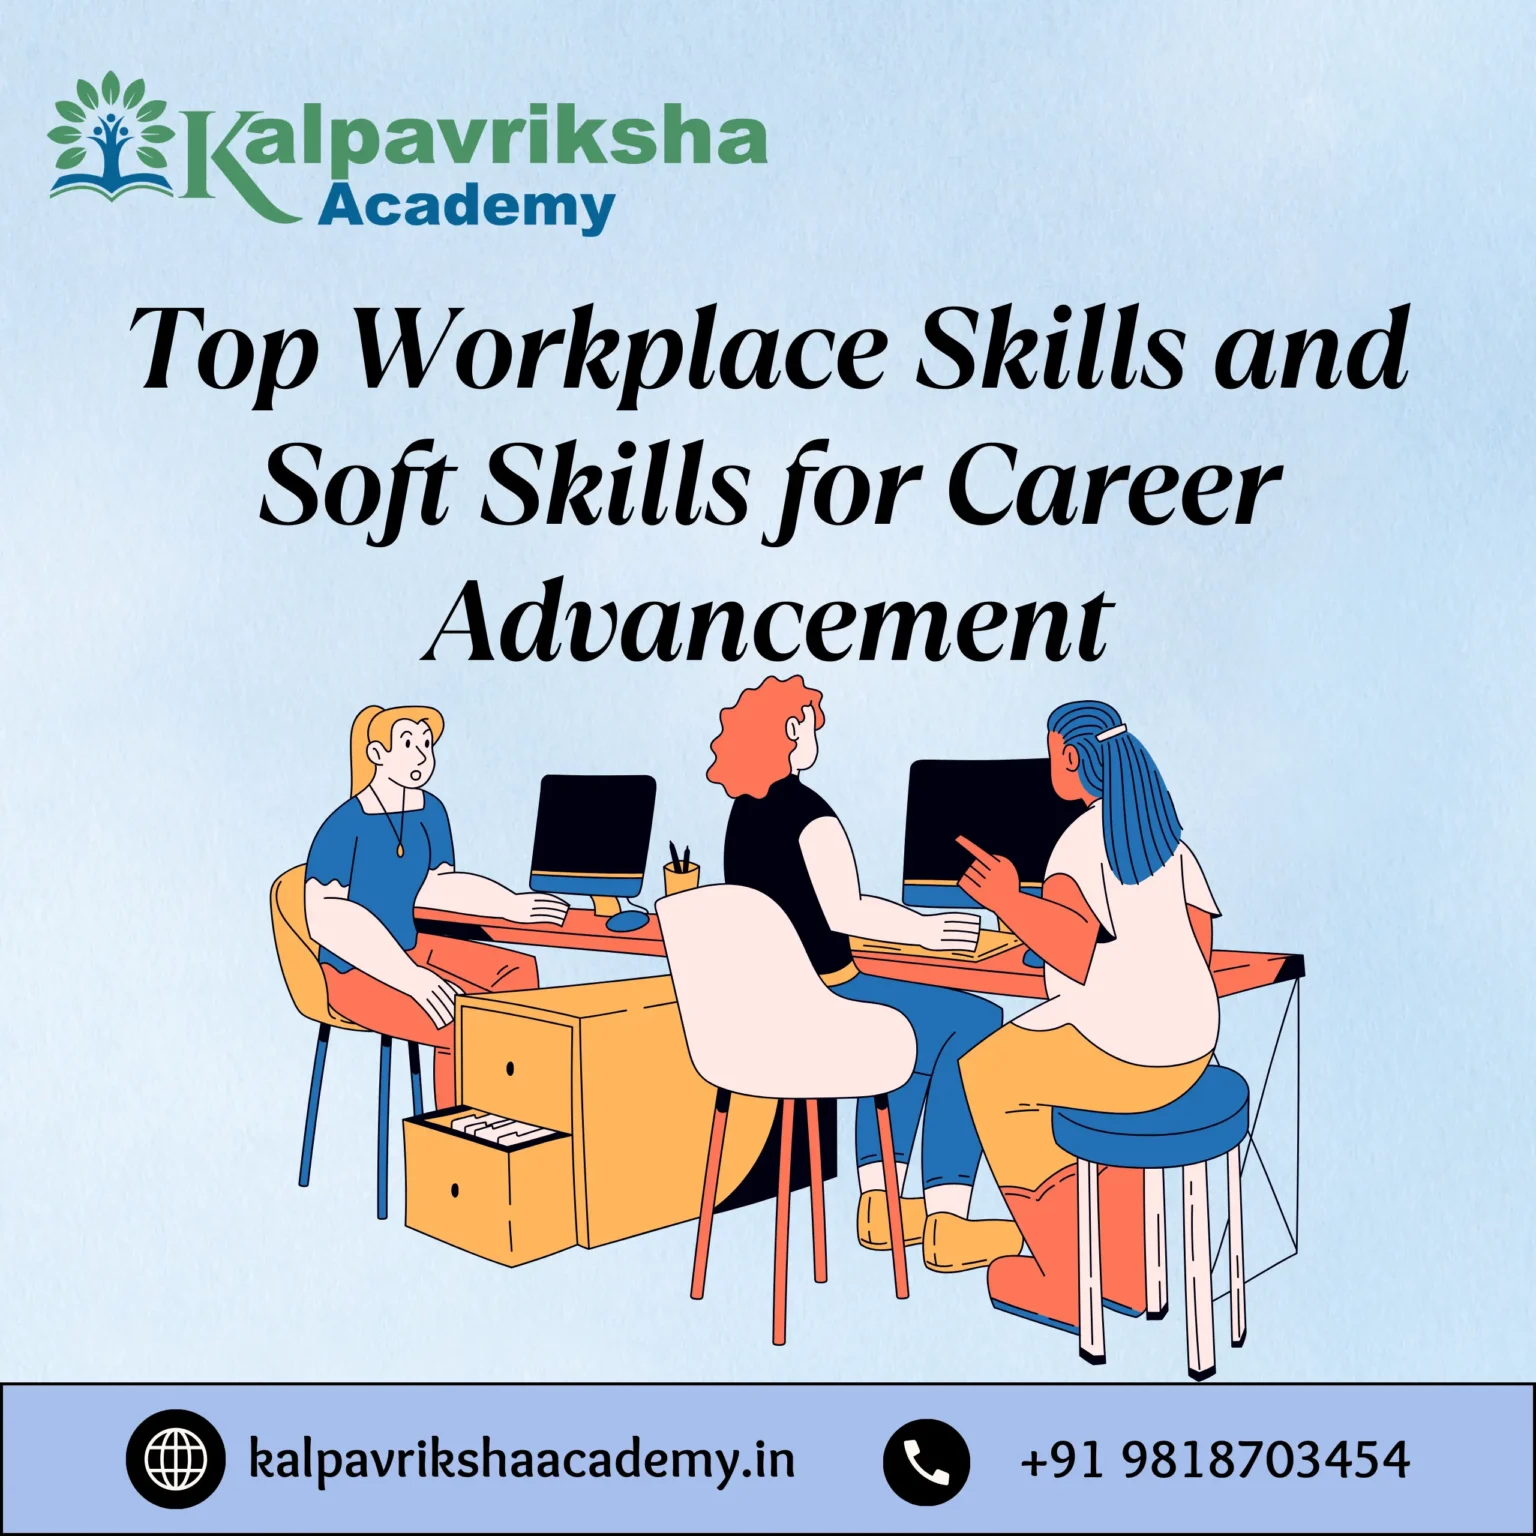 Top Workplace Skills and Soft Skills for Career Advancement